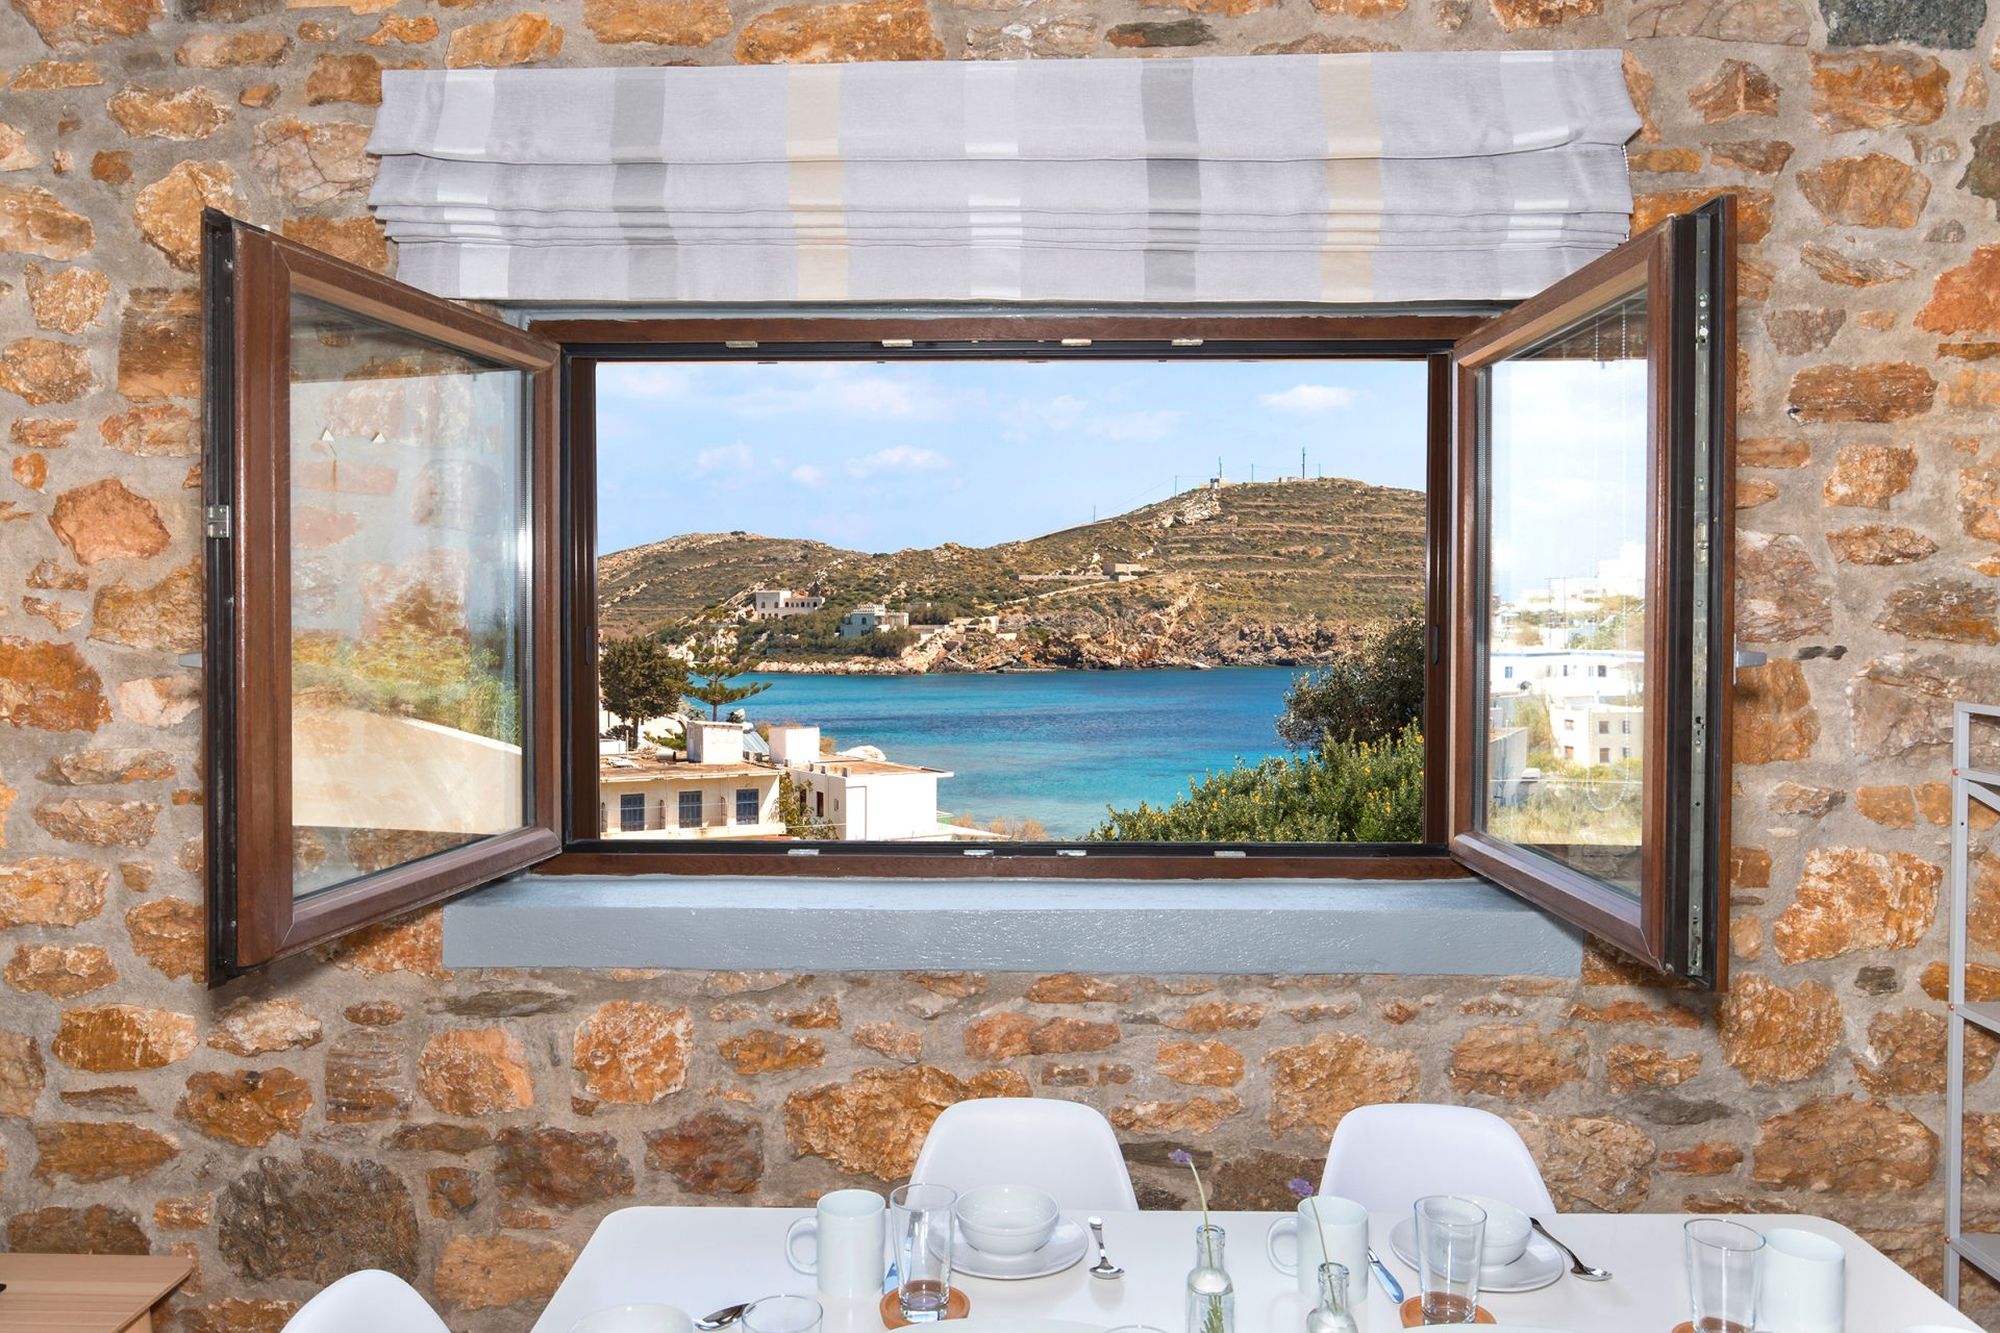 Amazing sea view from the window of a stone built Syra Suite residence.